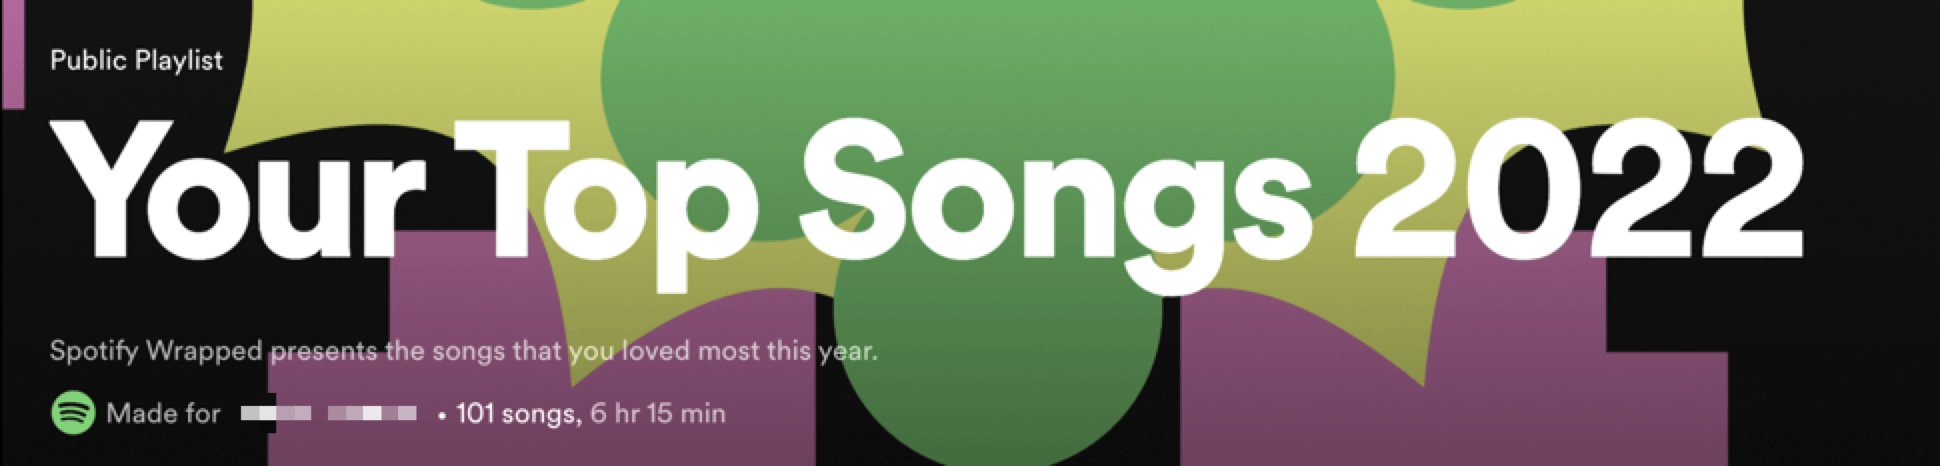 The top of a Spotify Wrapped playlist